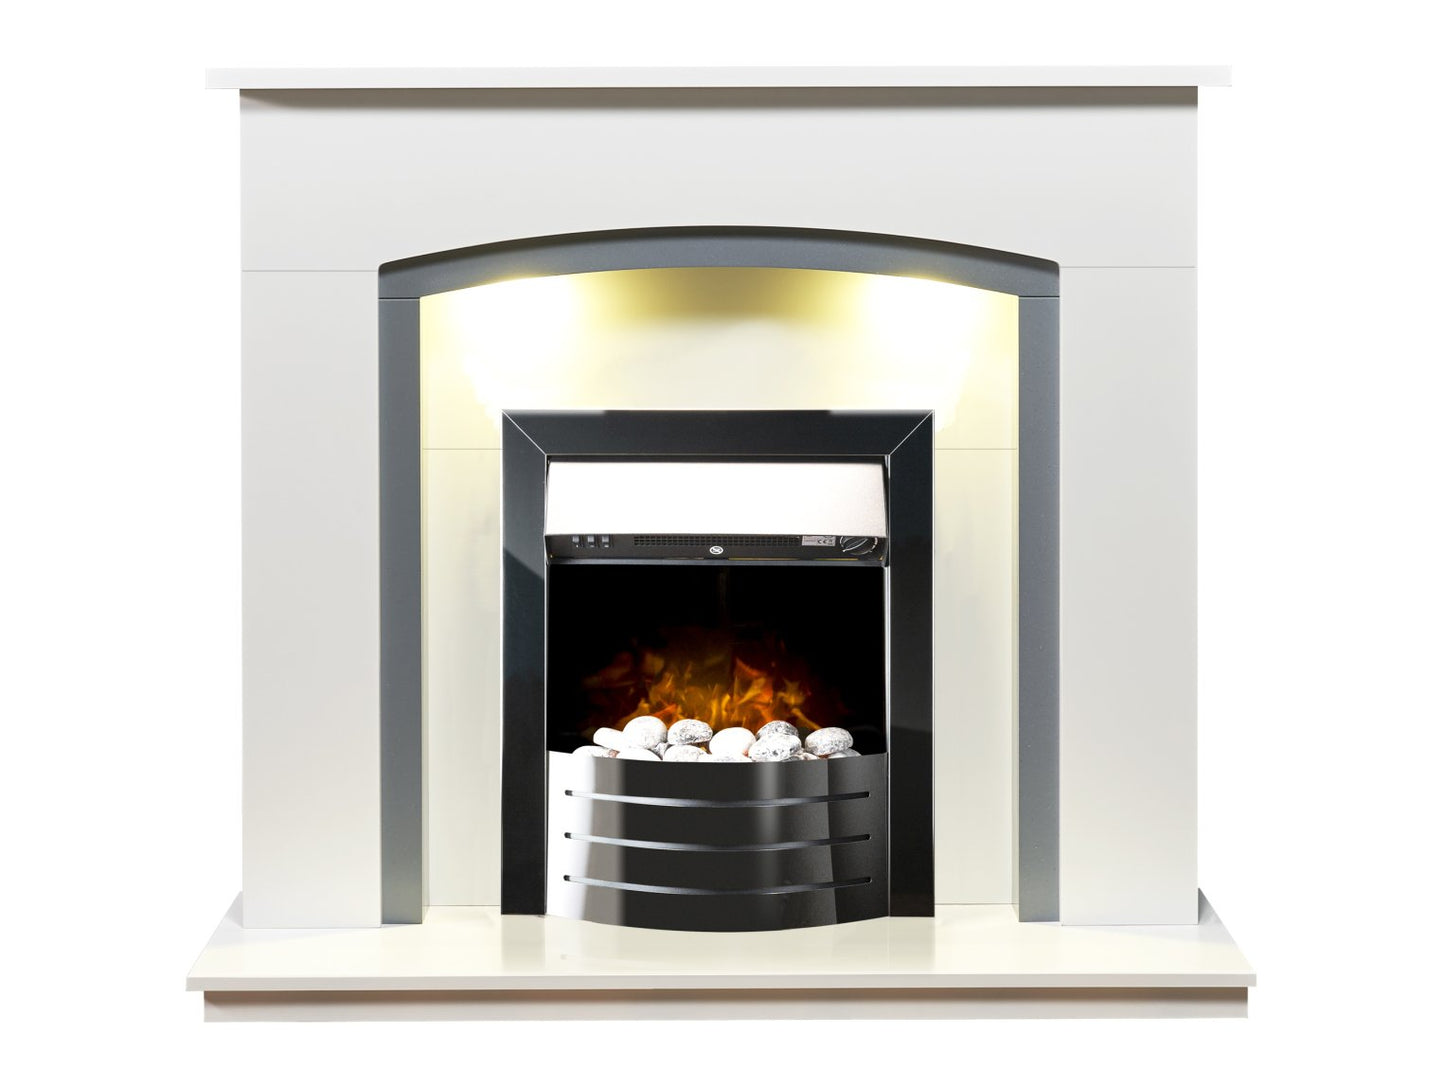 Adam Tuscany Fireplace in Pure White & Grey with Comet Electric Fire in Obsidian Black, 48 Inch